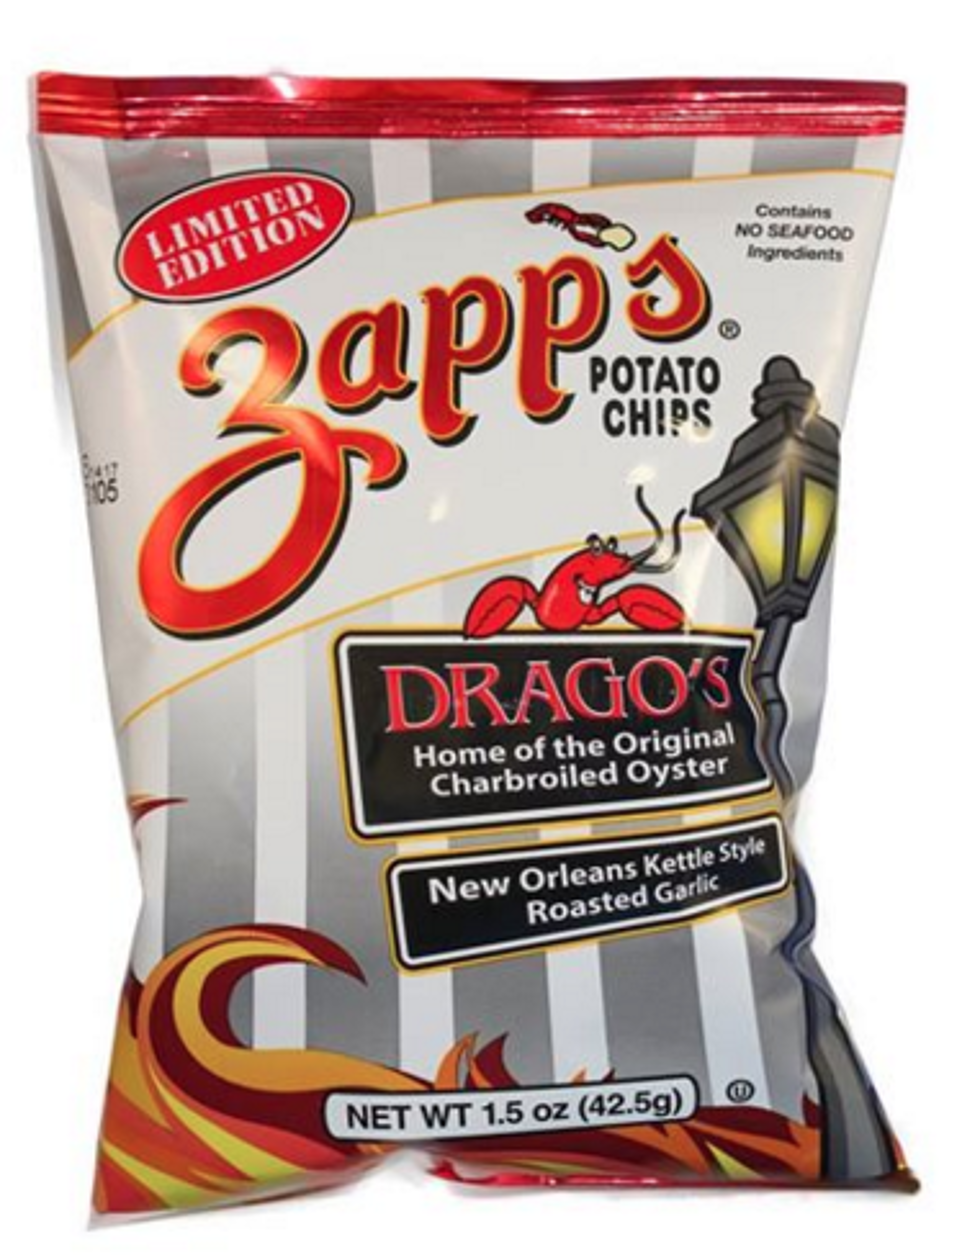 Zapp’s New Drago’s Charbroiled Oyster Potato Chips Are Sure To Be A Hit [PIC]